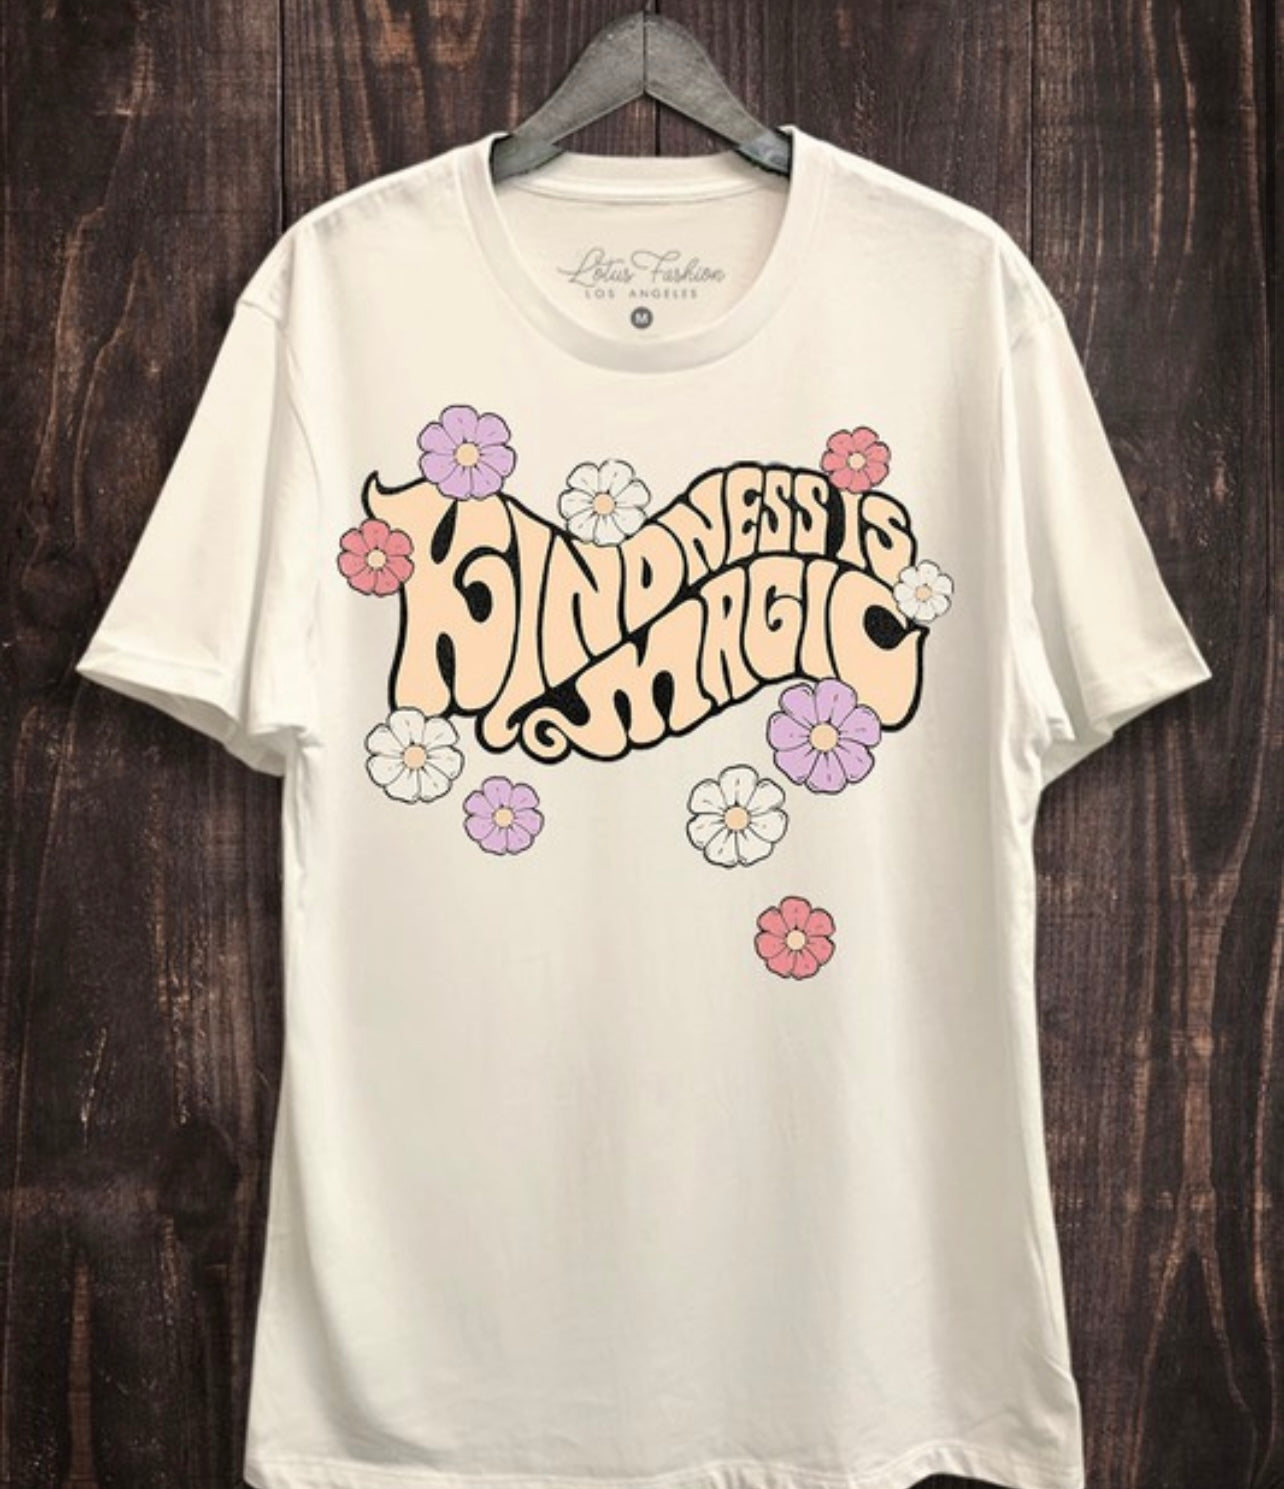 Kindness is Magic Graphic Tee